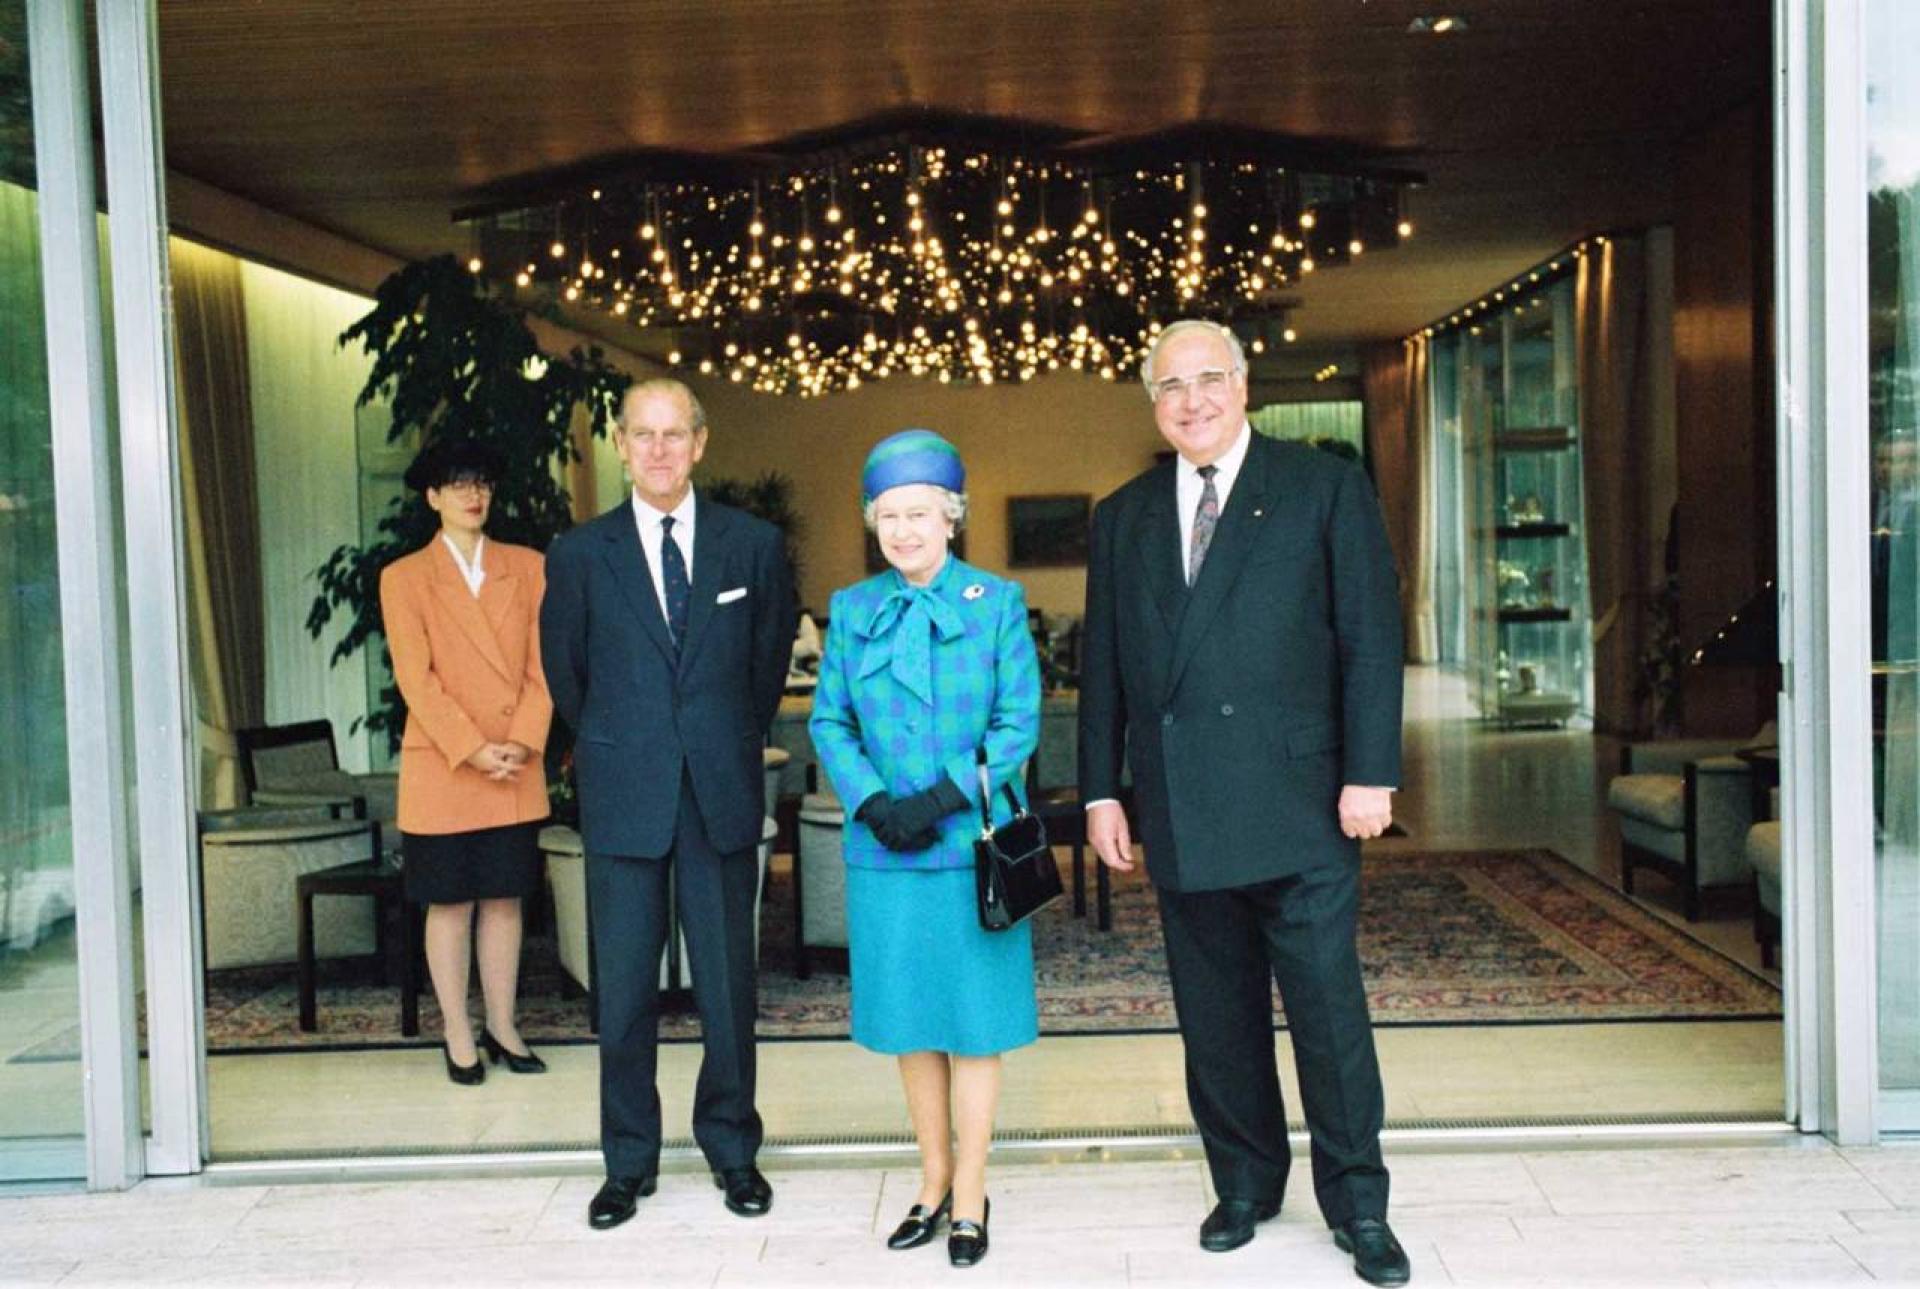 Prince Philip, Queen Elizabeth II and the ex-Chancellor of Germany Helmut Kohl front of the bungalow of the Chancellor in Bonn